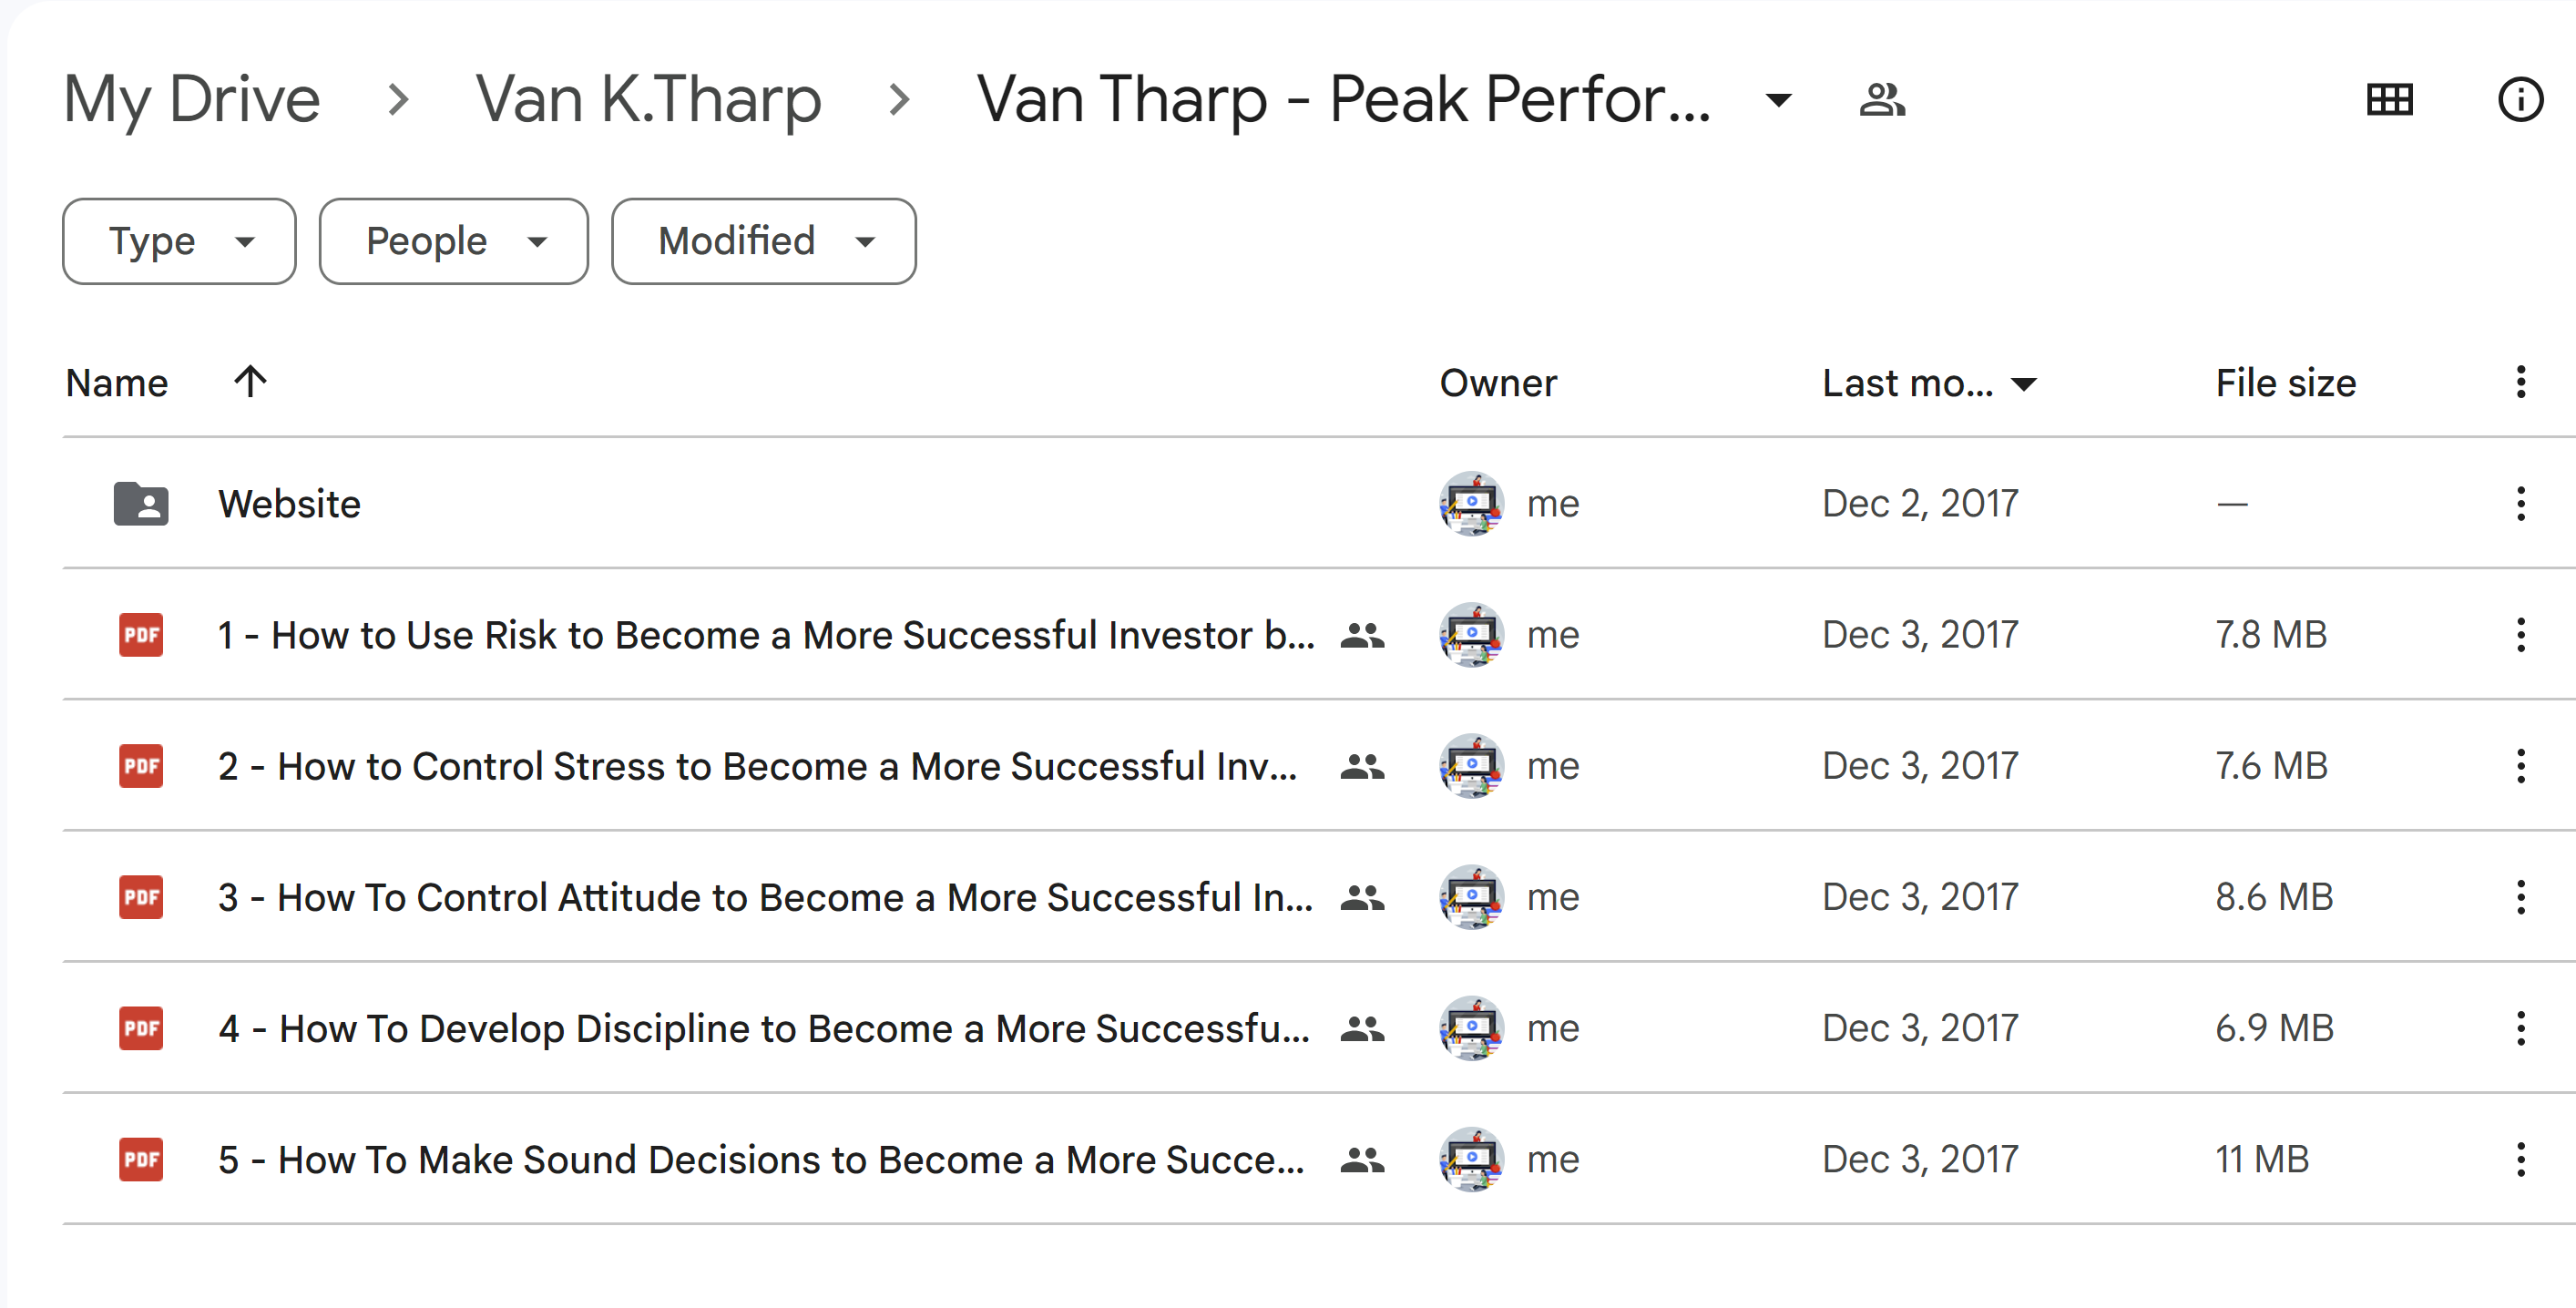 Van Tharp - Peak Performance Course For Investors And Traders